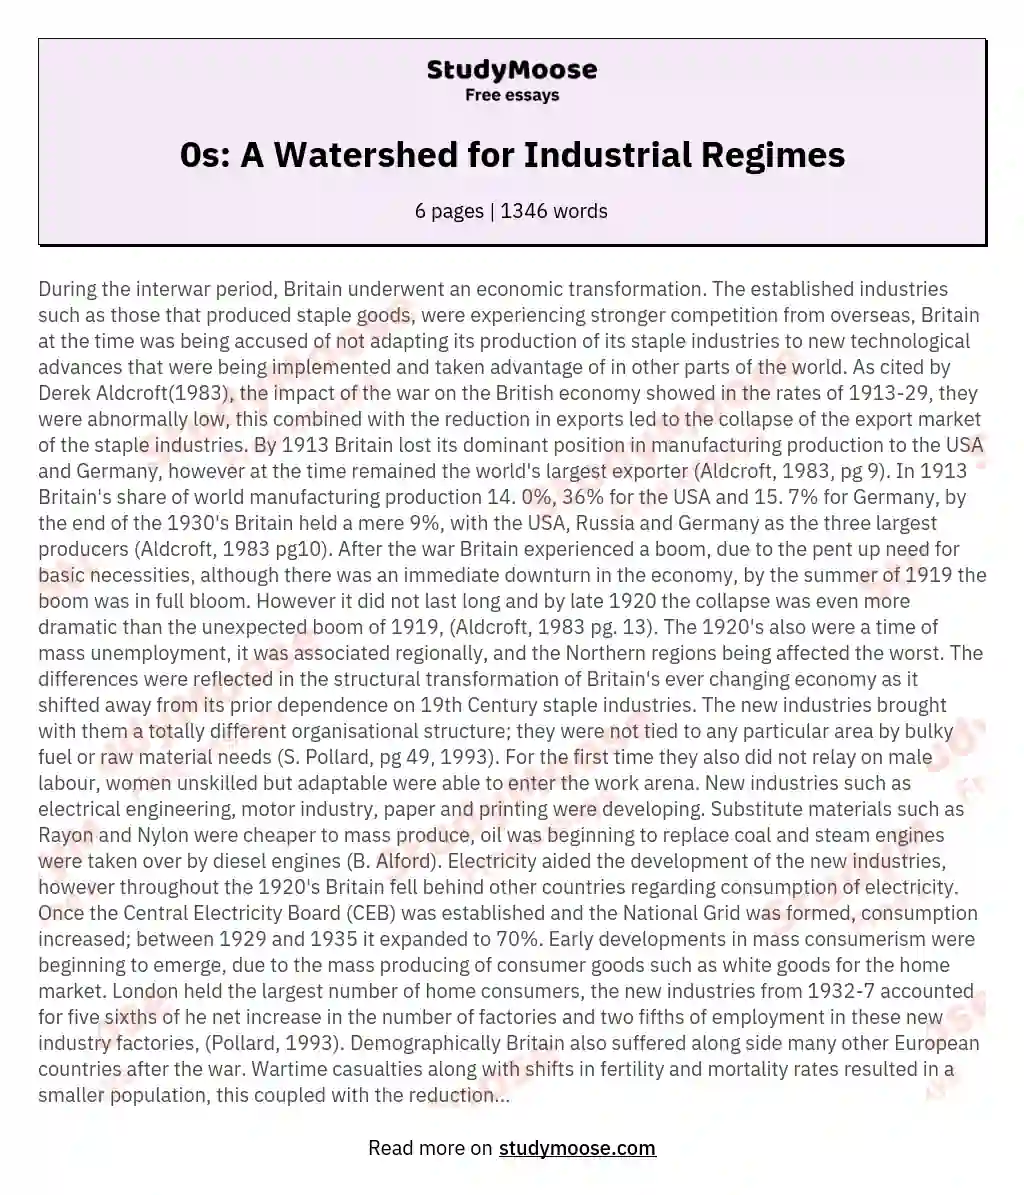 0s: A Watershed for Industrial Regimes essay